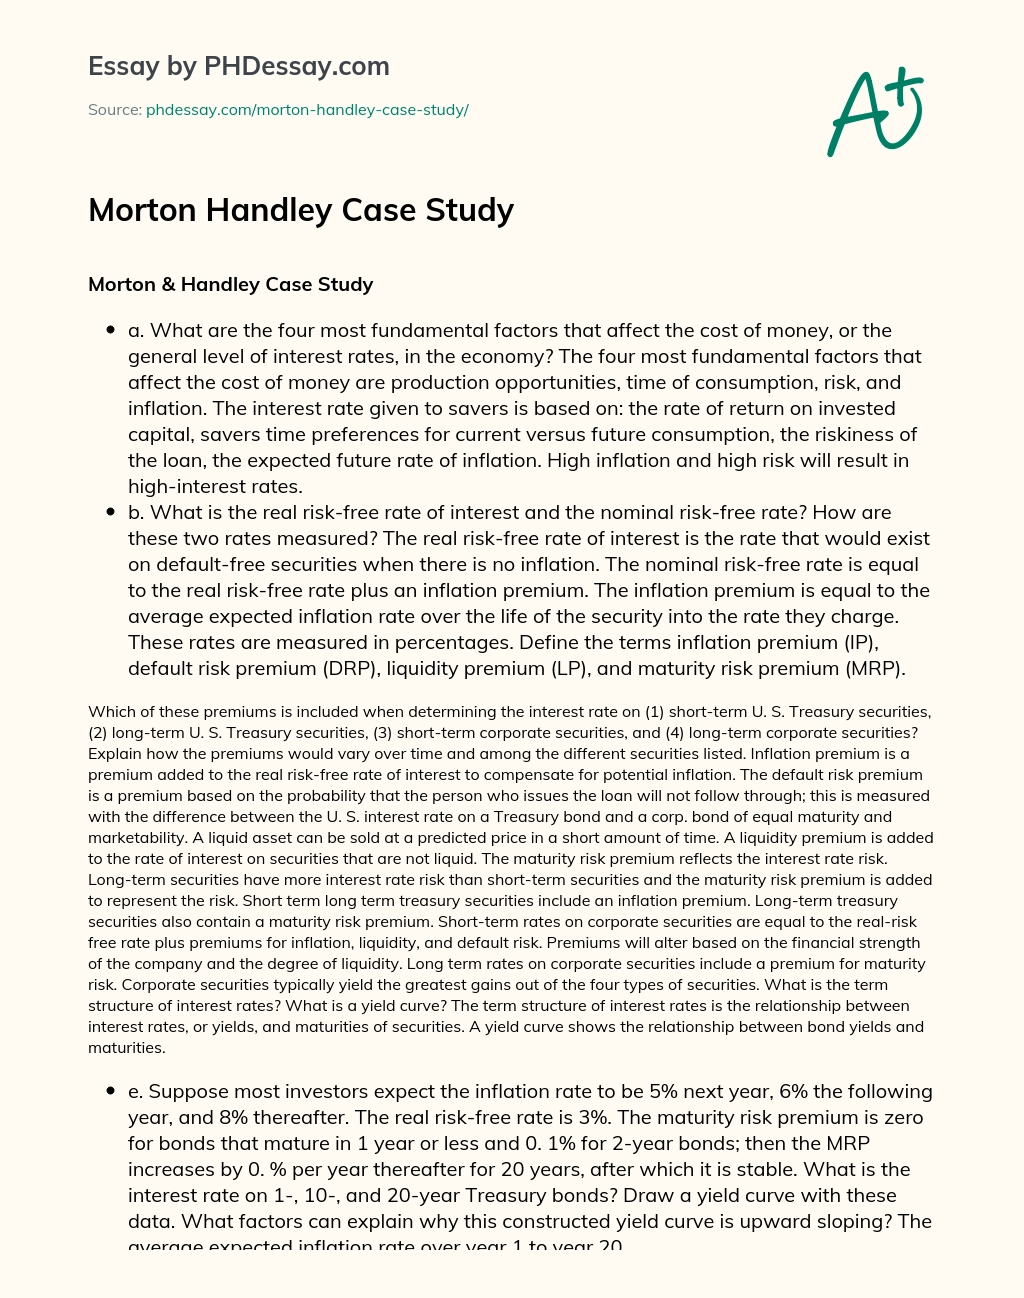 Morton & Handley Case Study: Questions and Answers essay